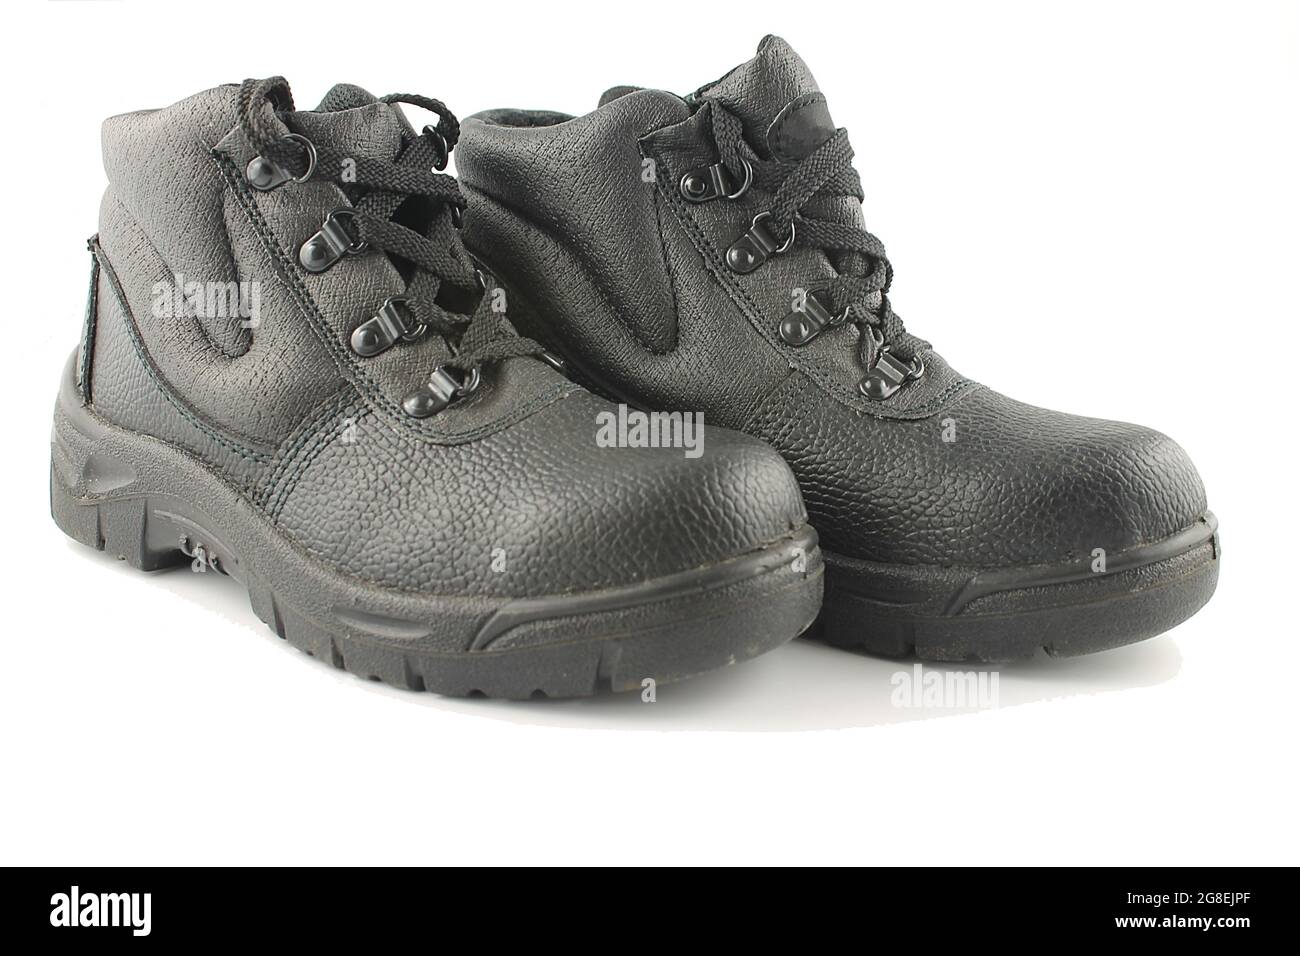 Black work safety boots isolated on a white background Stock Photo